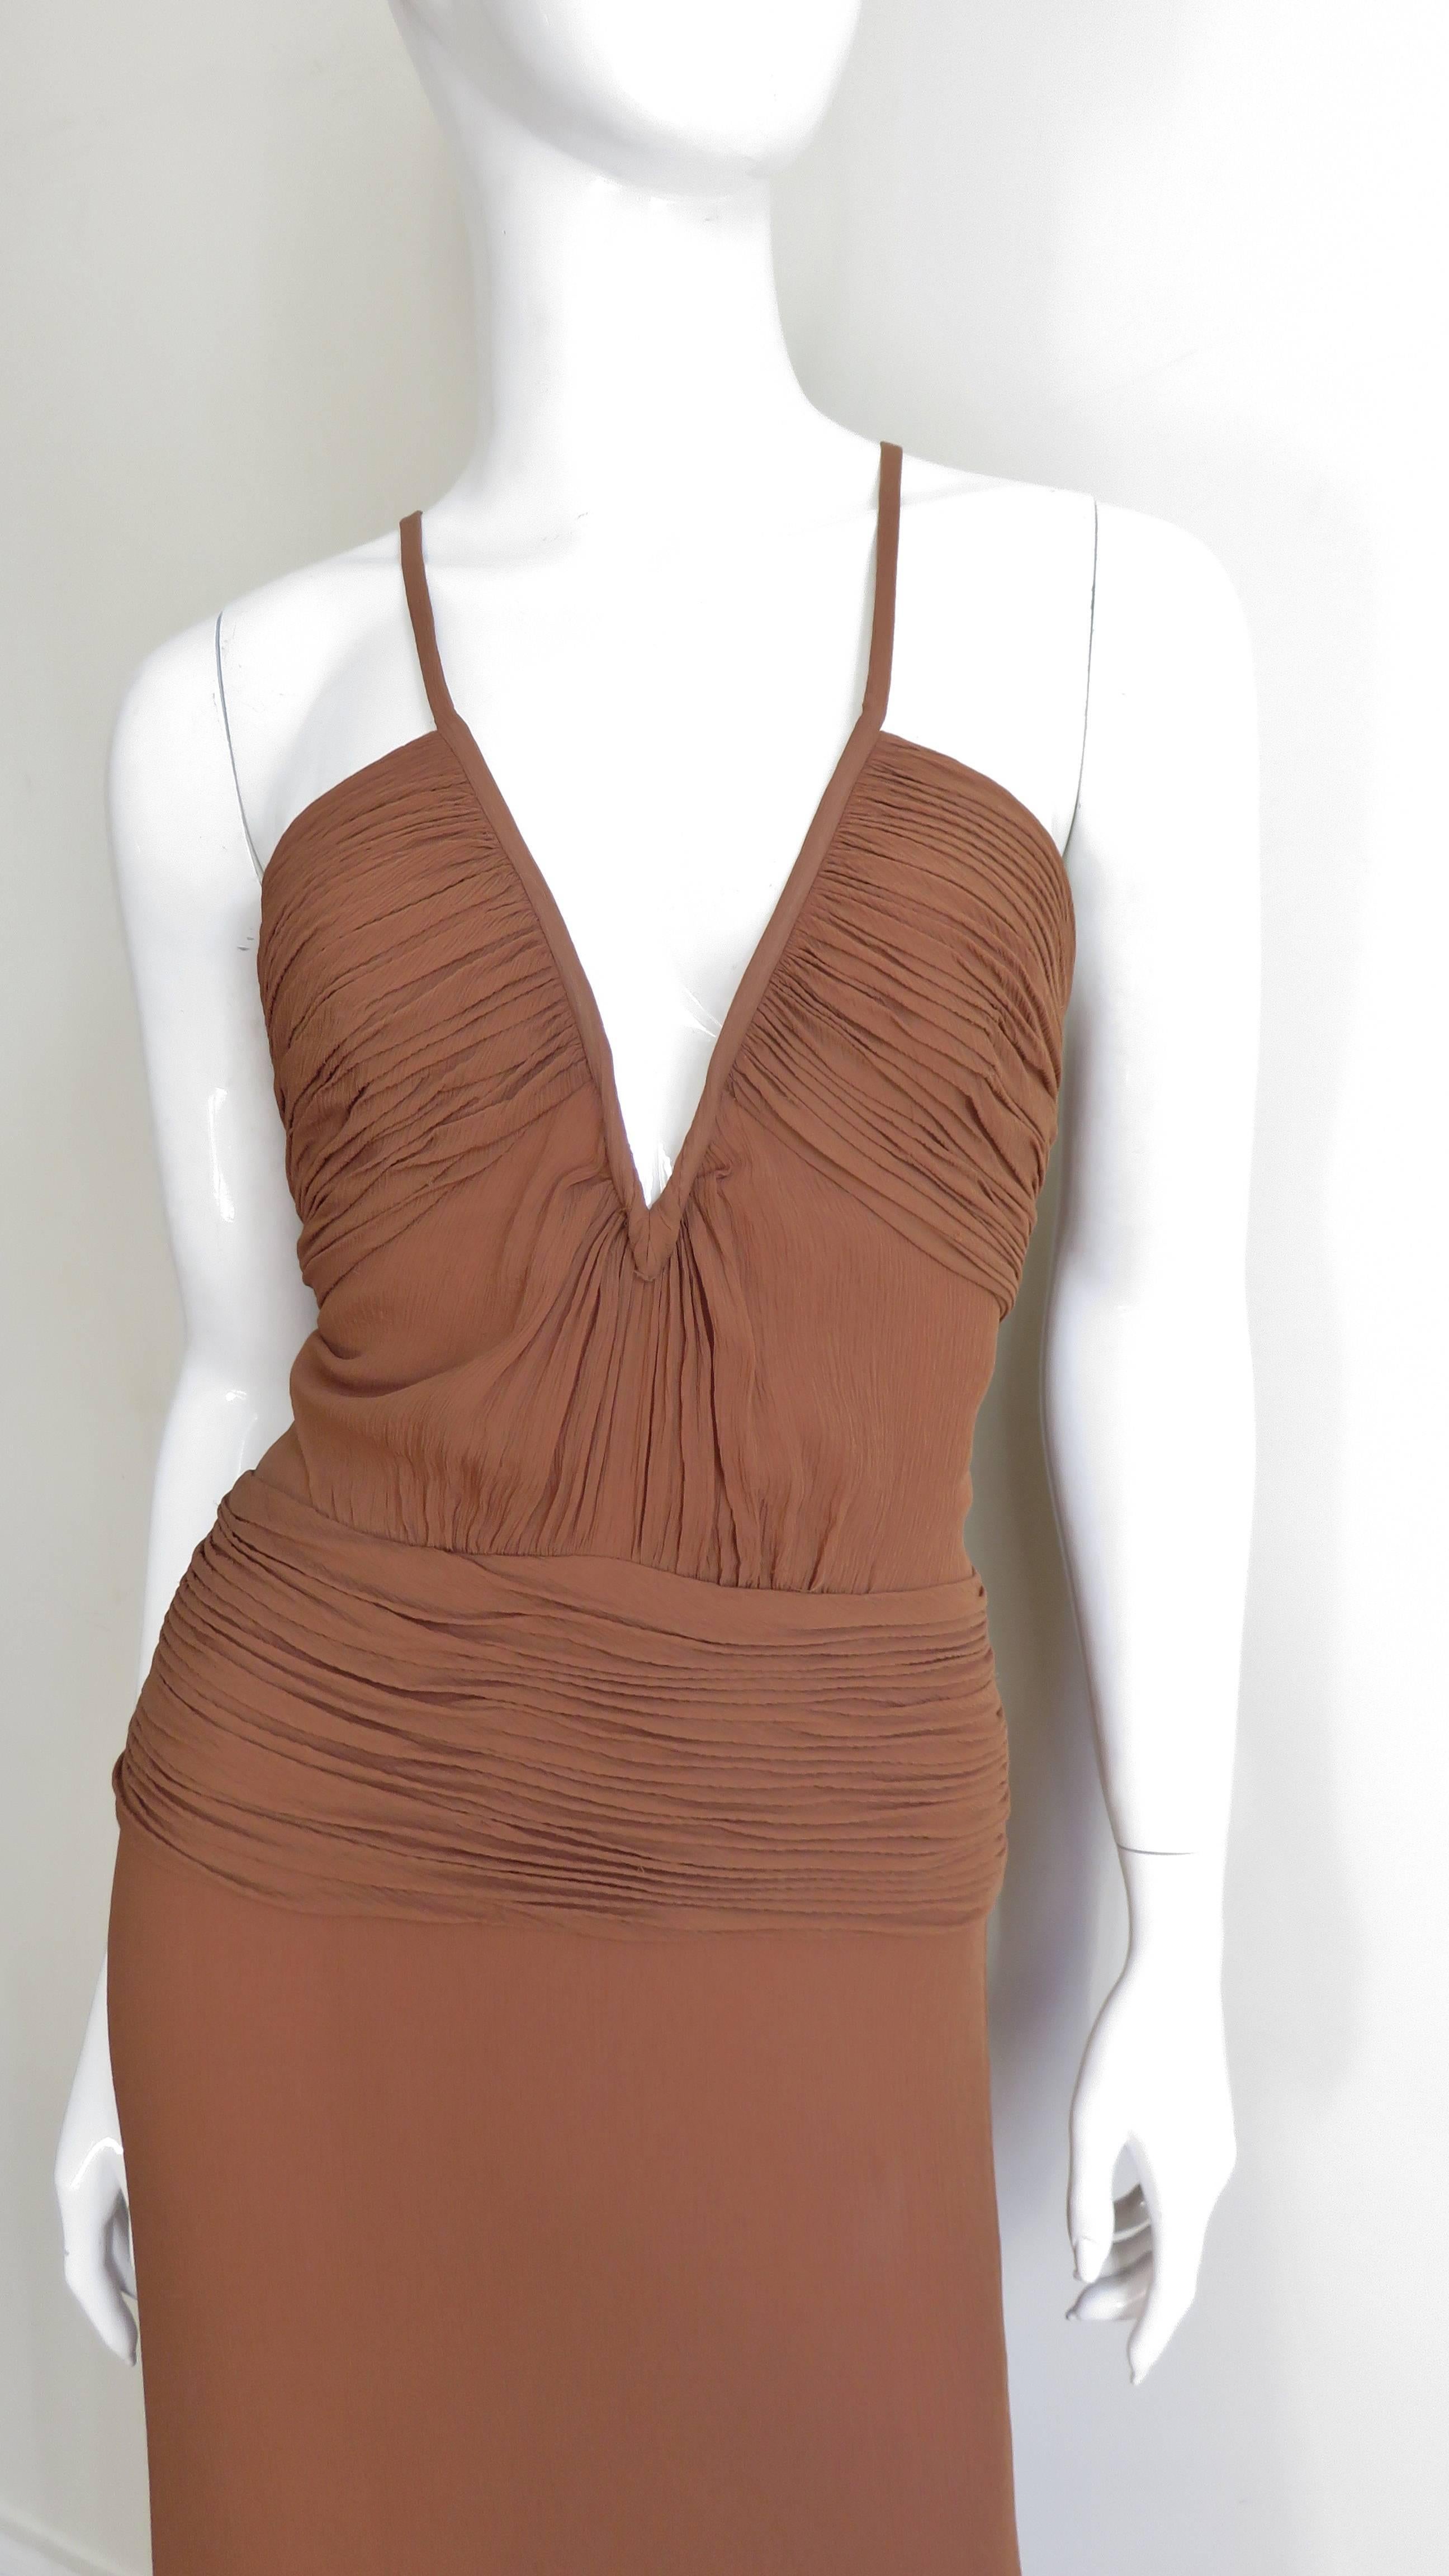 Gianni Versace Ruched Silk Dress 1990s In Good Condition For Sale In Water Mill, NY